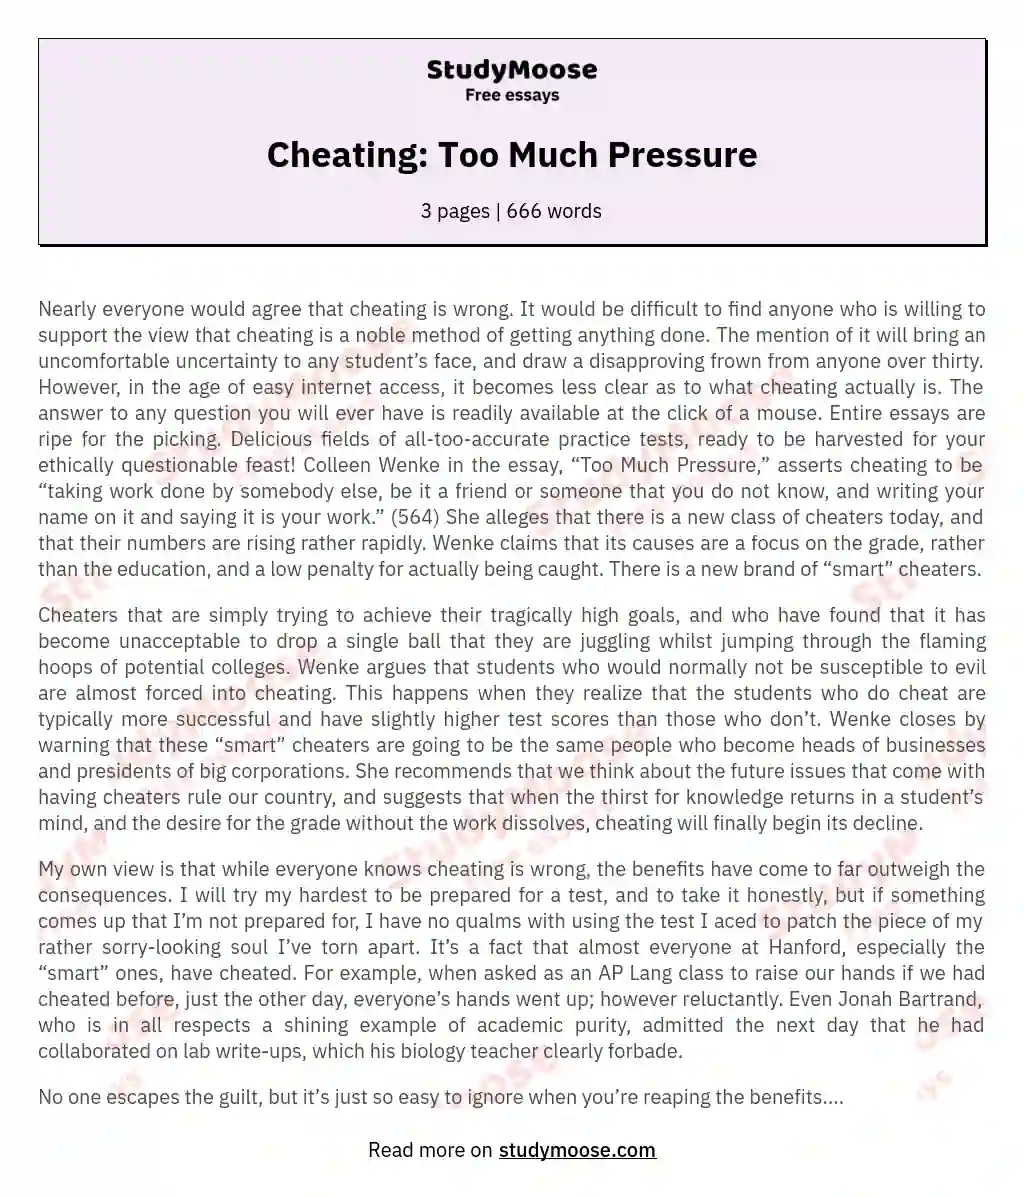 Cheating: Too Much Pressure